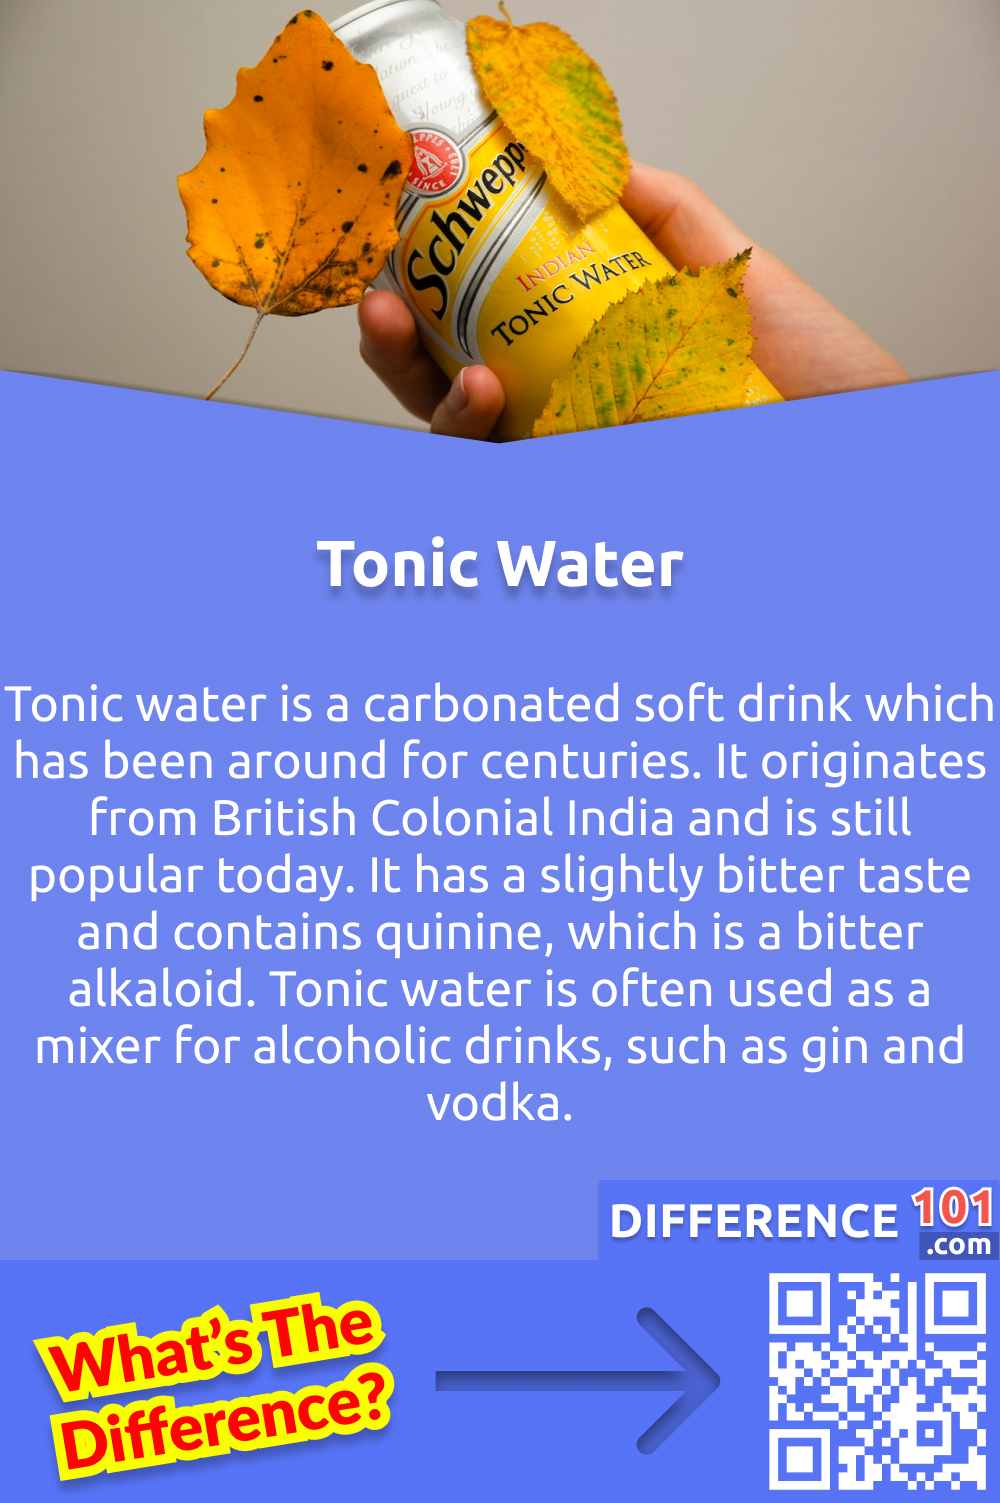 What Is Tonic Water? Tonic water is a carbonated soft drink which has been around for centuries. It originates from British Colonial India and is still popular today. It has a slightly bitter taste and contains quinine, which is a bitter alkaloid. Quinine helps to fight malaria and is thought to have medicinal properties. Tonic water is often used as a mixer for alcoholic drinks, such as gin and vodka. It can also be enjoyed plain, with ice and a slice of lime. Tonic water contains artificial sweetener, so it is a lower calorie alternative to colas and other sweetened soft drinks. In recent years, the market has seen an influx of flavored tonic waters, such as lime and ginger, as well as more calorie-conscious options.